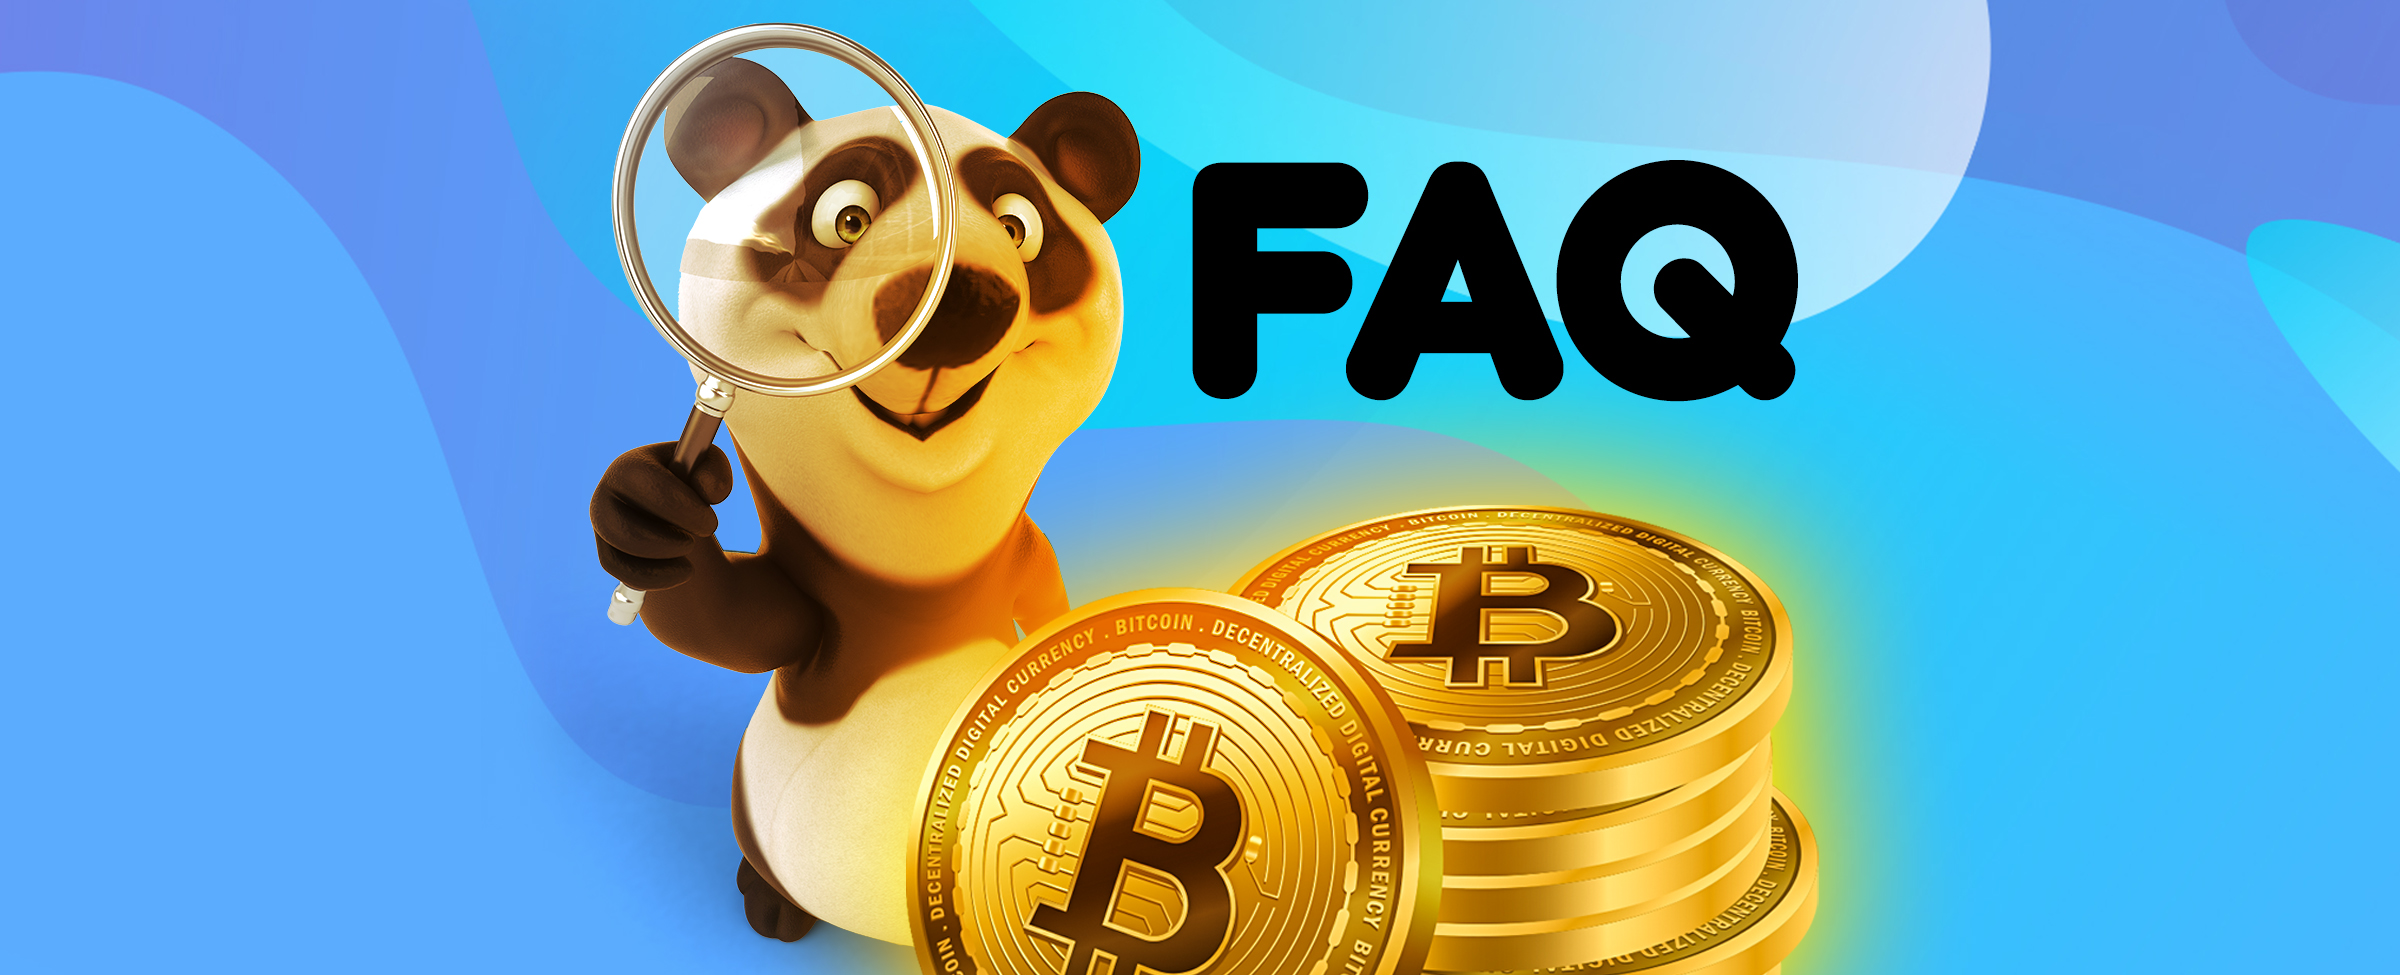 Panda cartoon character standing behind a pile of bitcoins while holding up a magnifying glass next to the letters FAQ